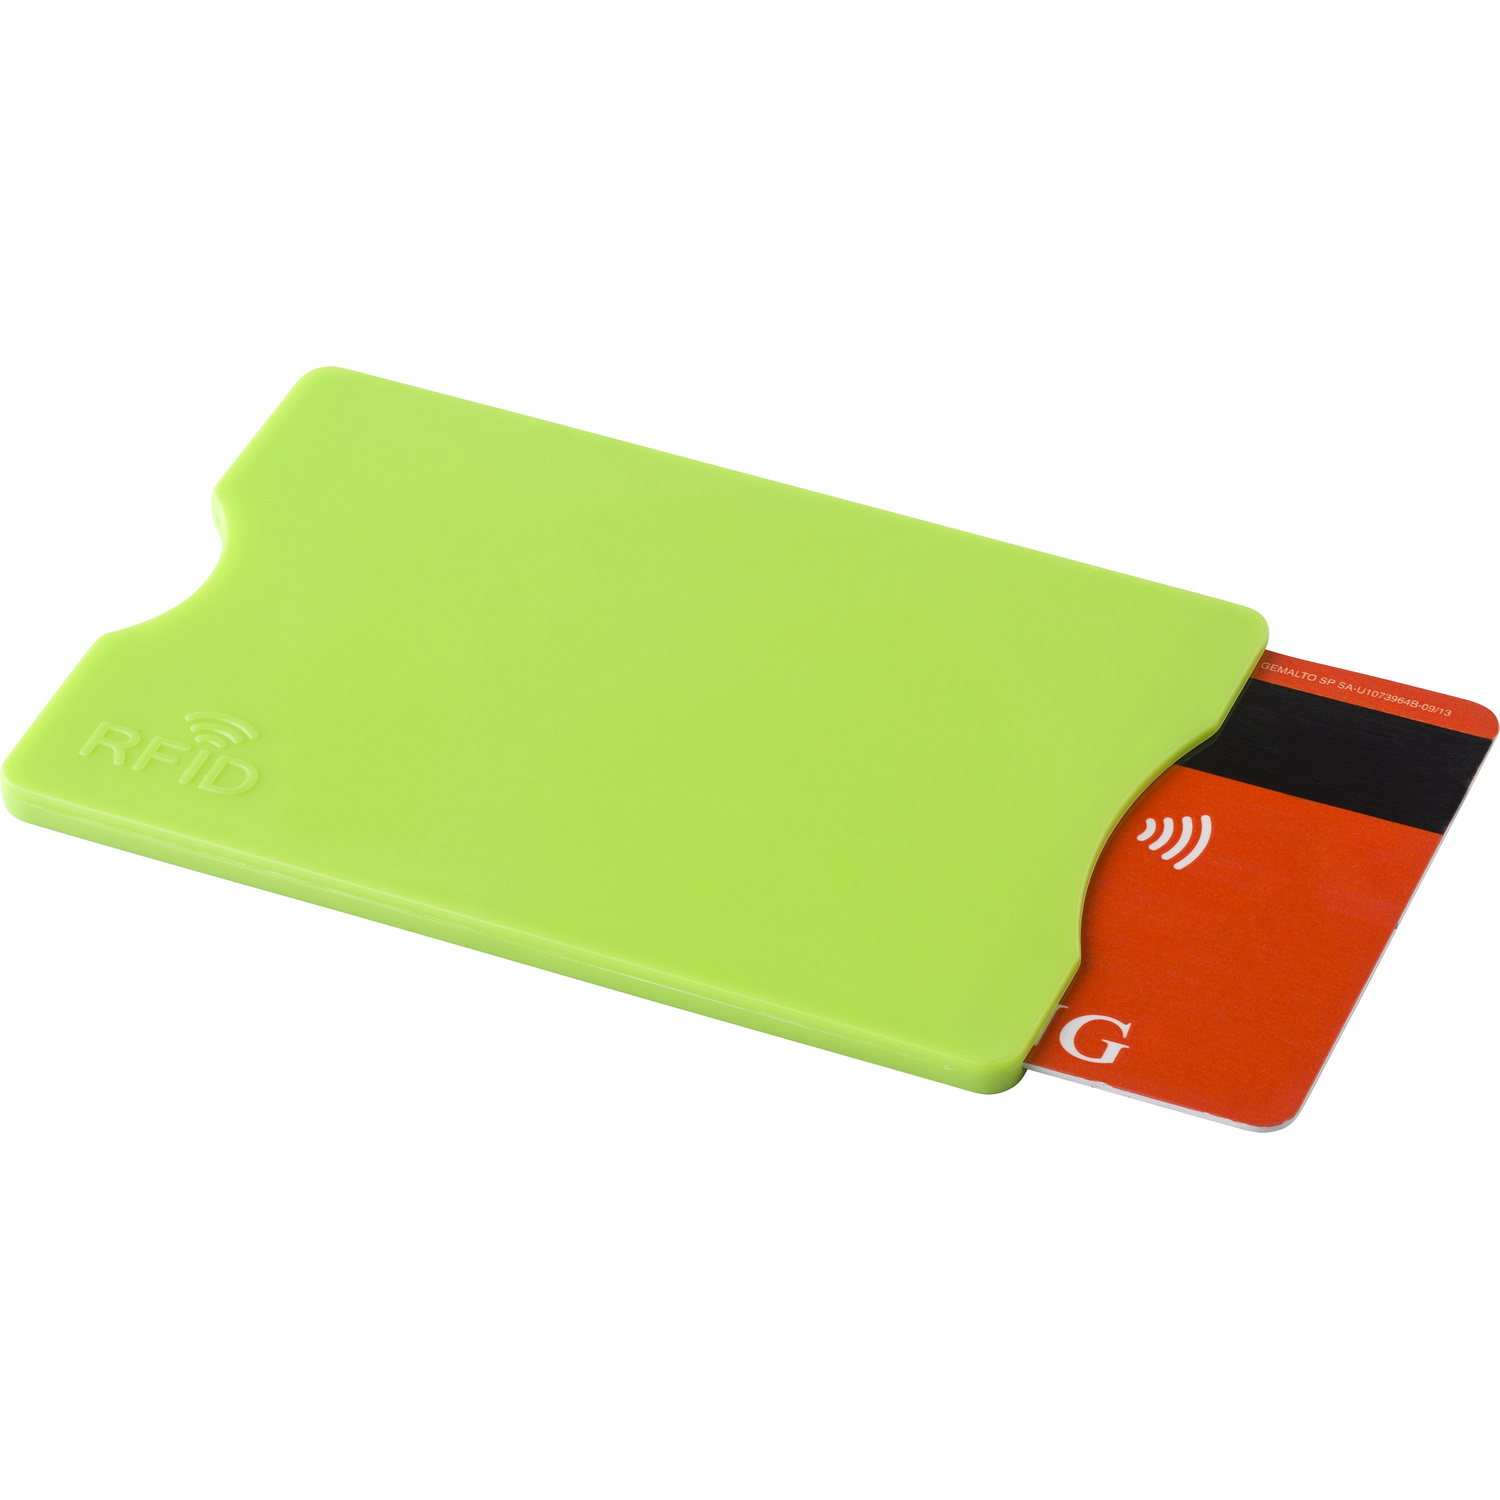 007252 019999999 3d045 frt pro01 fal - Card holder with RFID protection